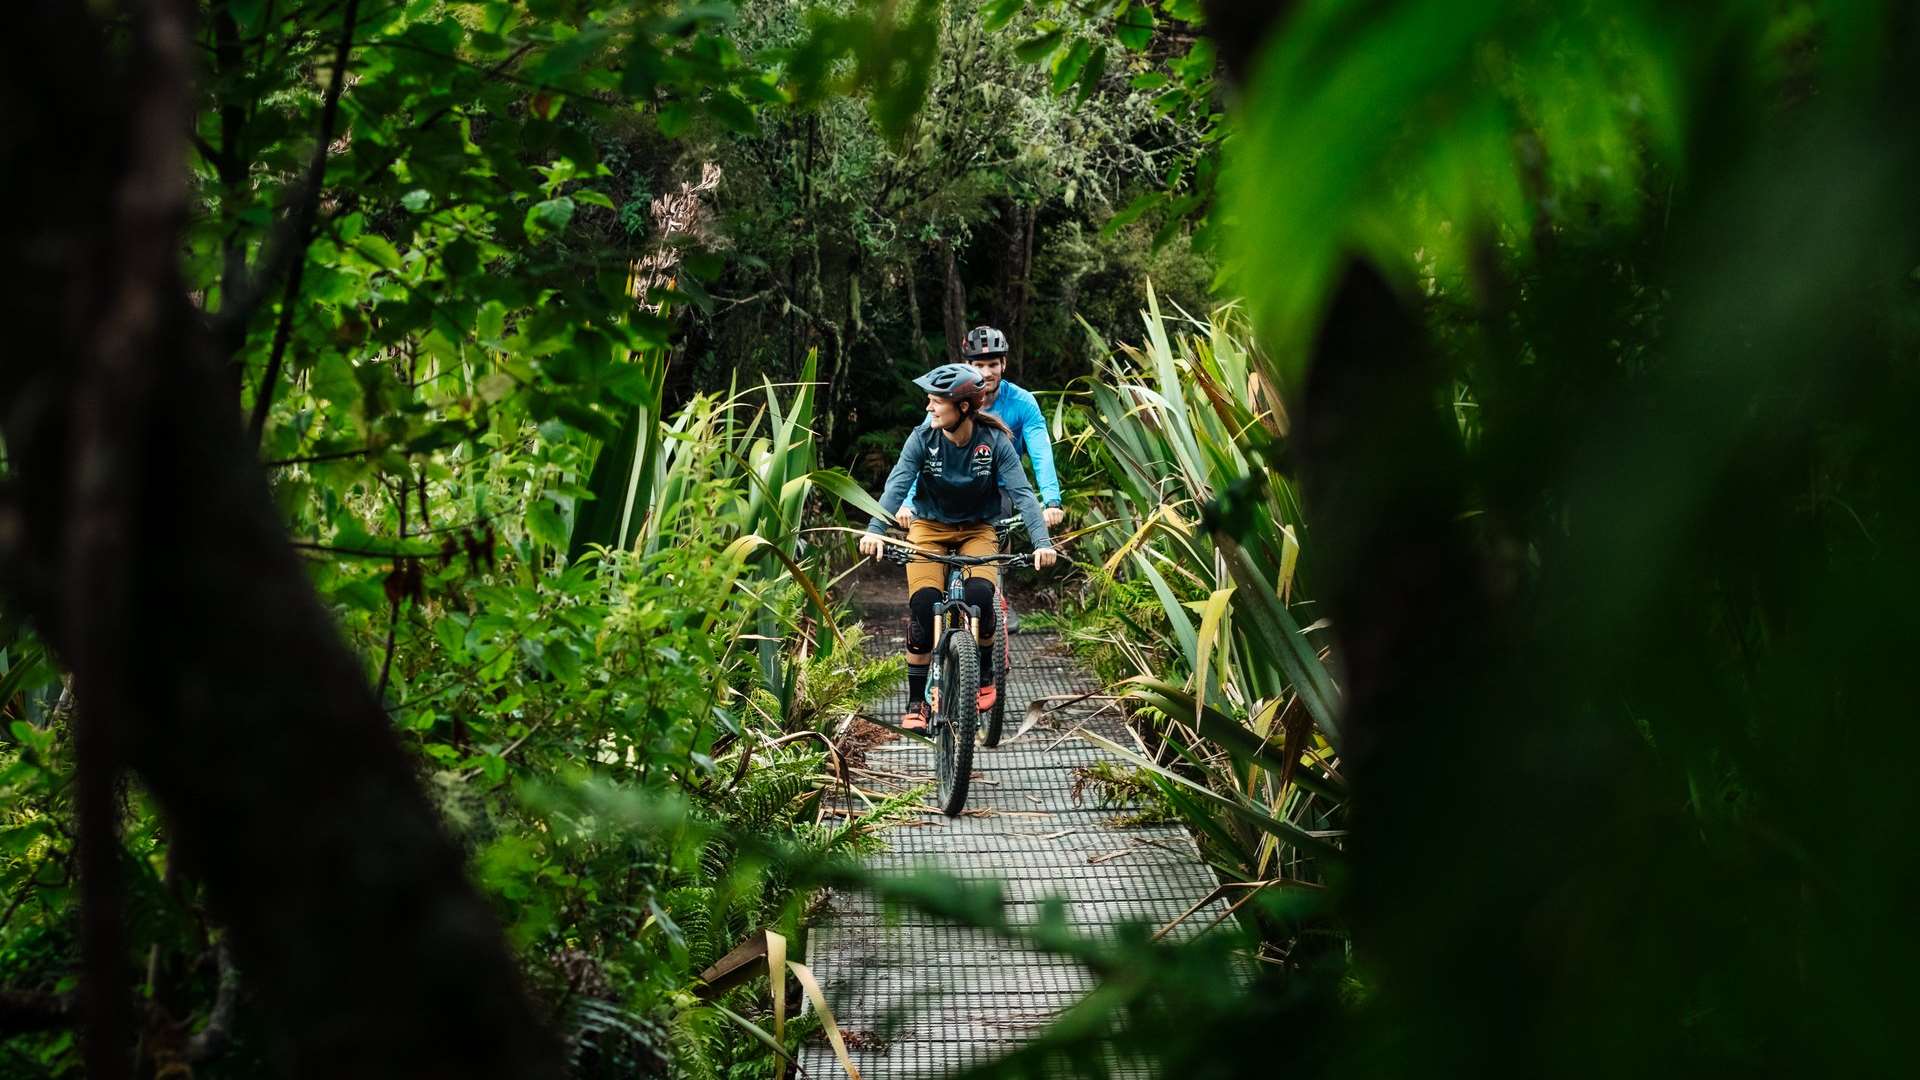 Bas van Steenbergen and Vaea Verbeeck riding the Great Lake Trails, Taupo New Zealand